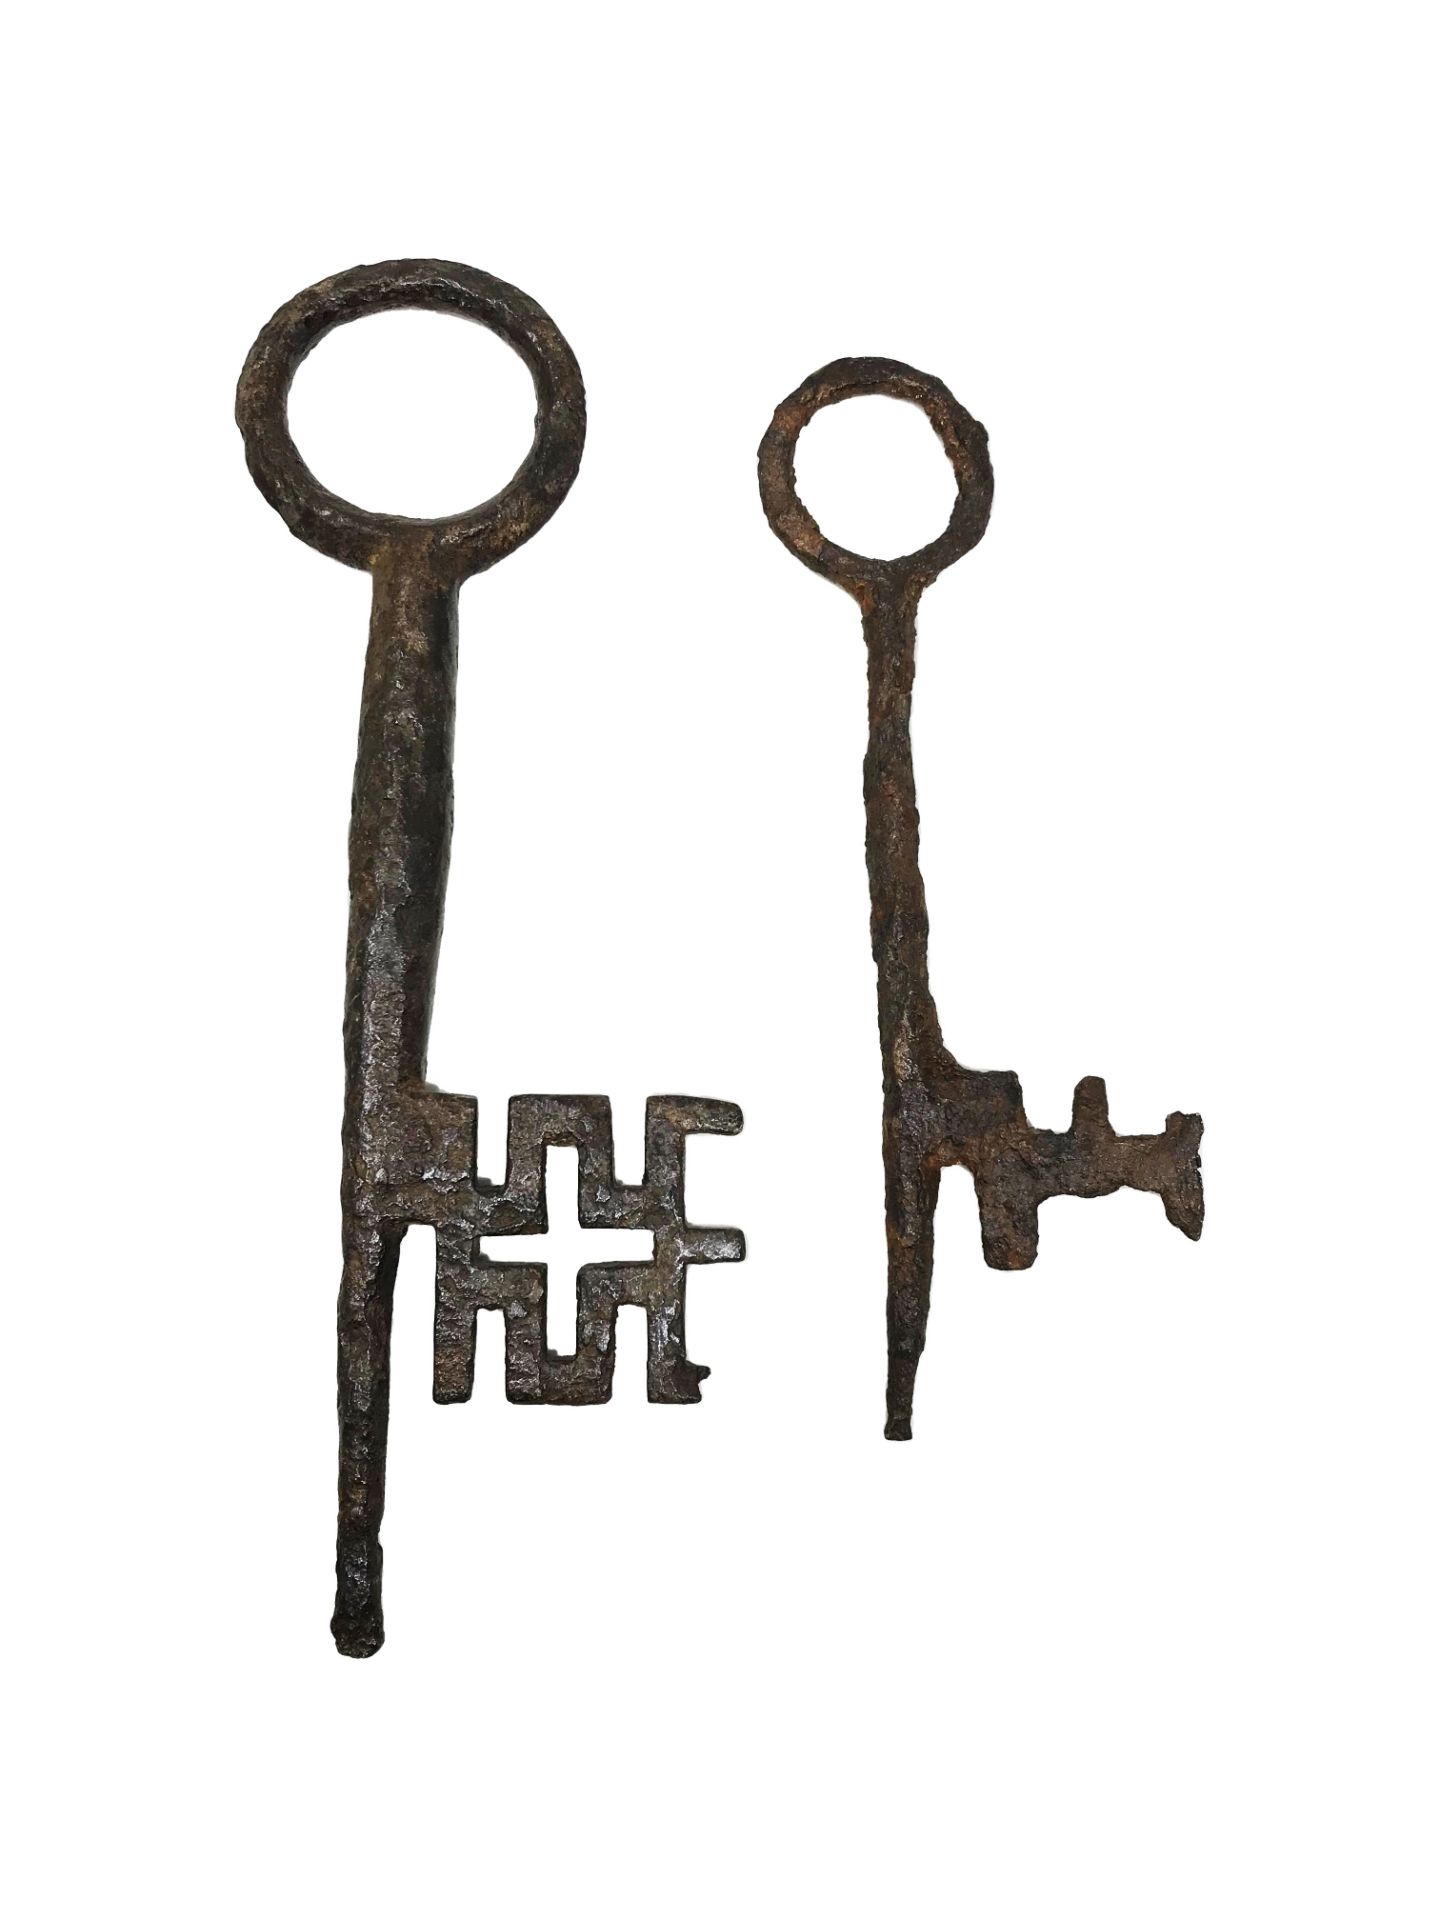 Two gothic keys21, 8 - 17, 2 cm. Part of the chapter "From the Time of the Cathedrals". - Image 2 of 2